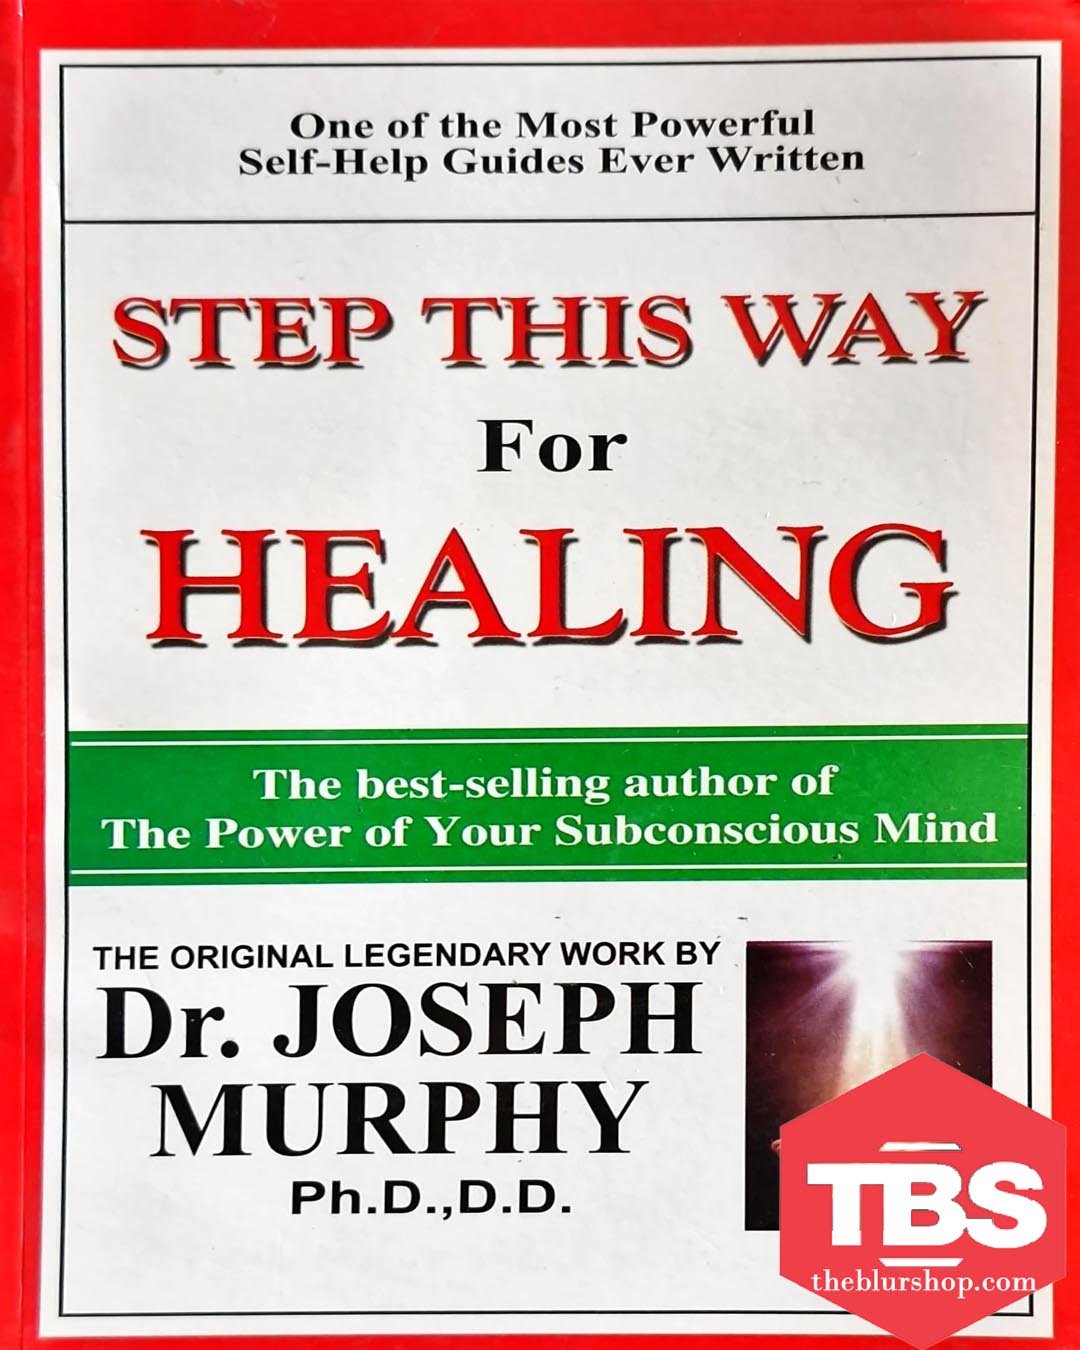 Step this Way For Healing